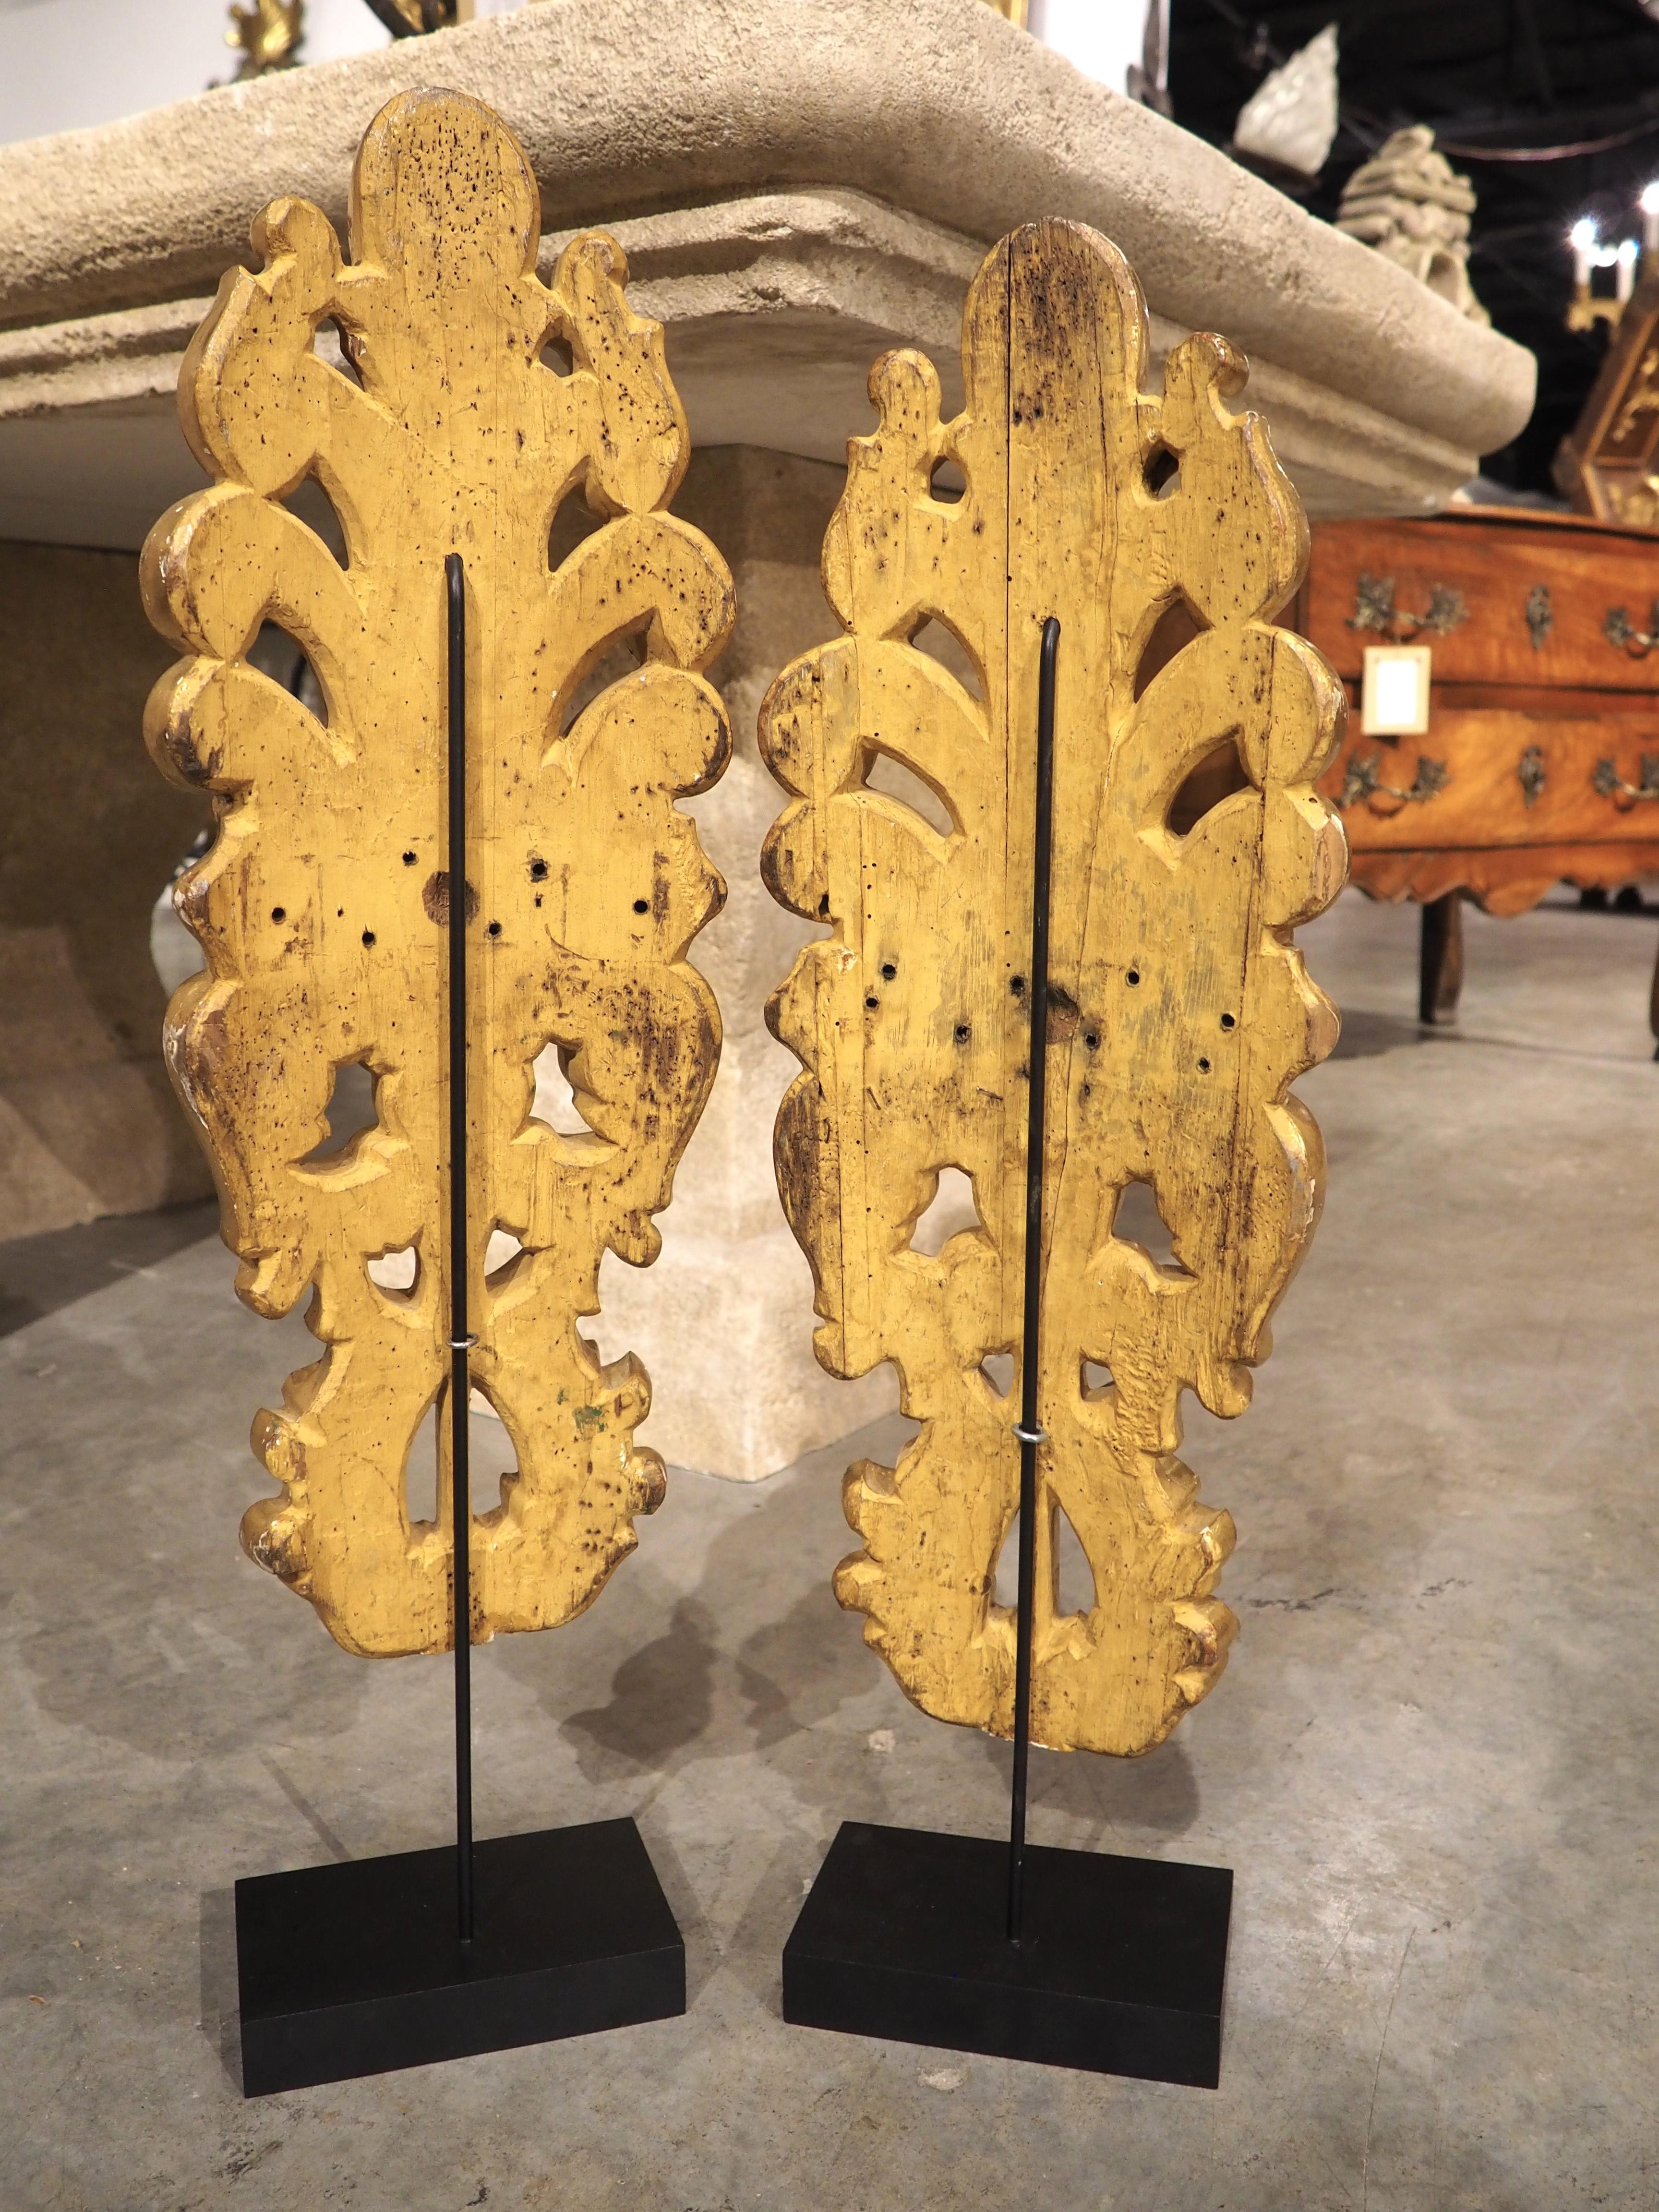 This pair of Italian giltwood ornaments are fragments from an original late 1700s Neoclassical architectural. They have been mounted more recently on painted black stands with metal arms.

The gilding has retained much of its original luster,